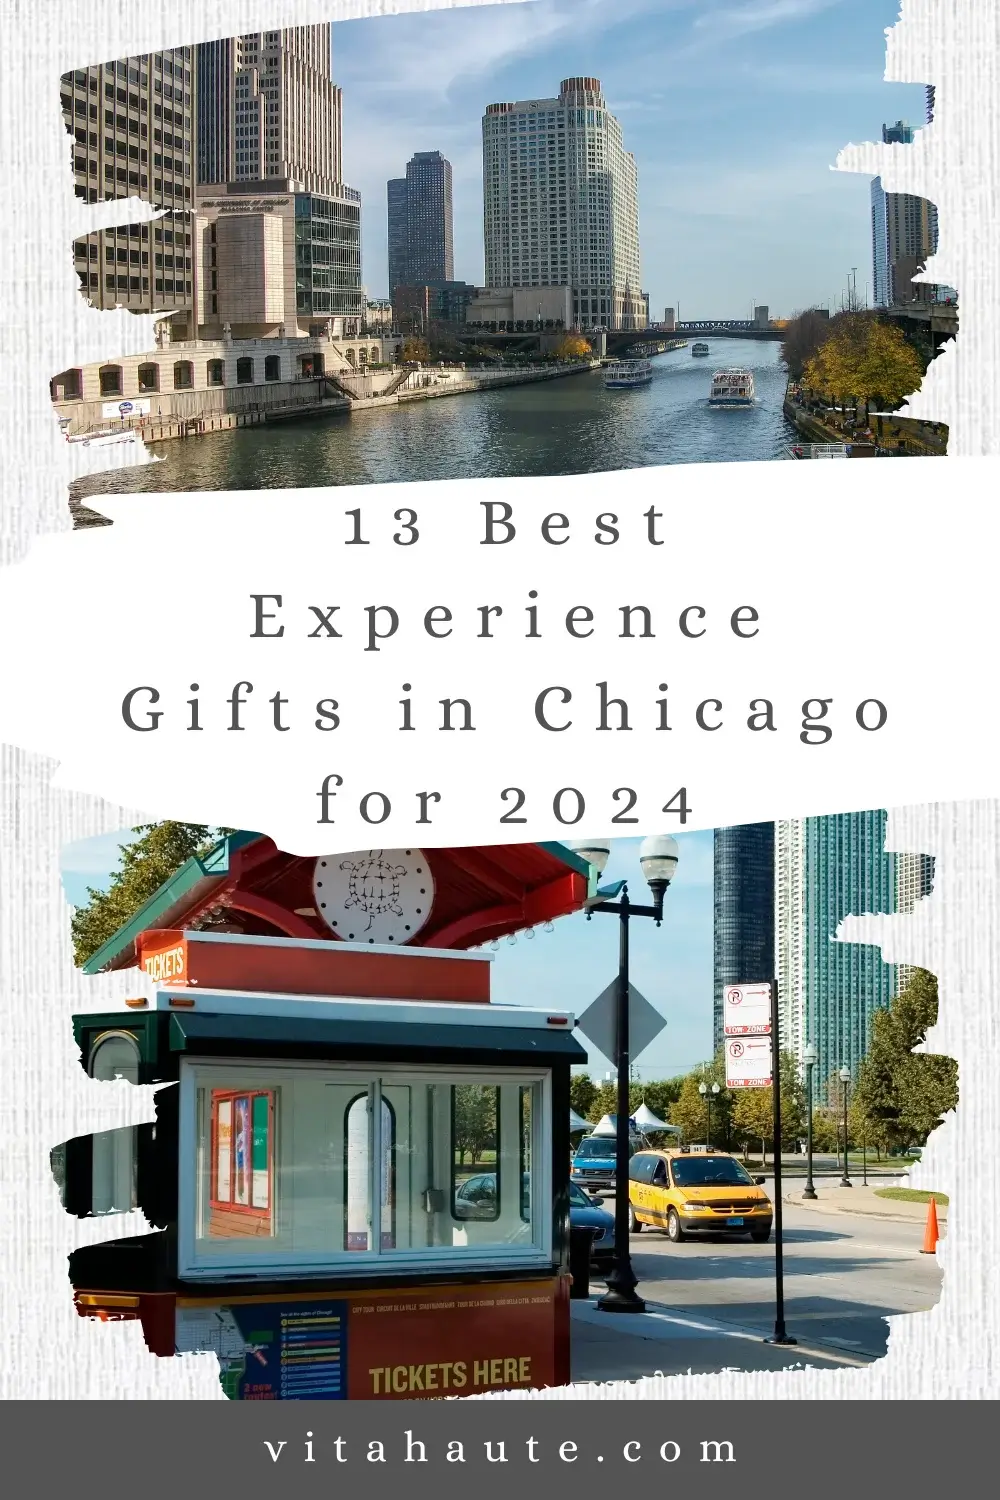 Snapshots of various tours as experience gifts in Chicago in the year 2024